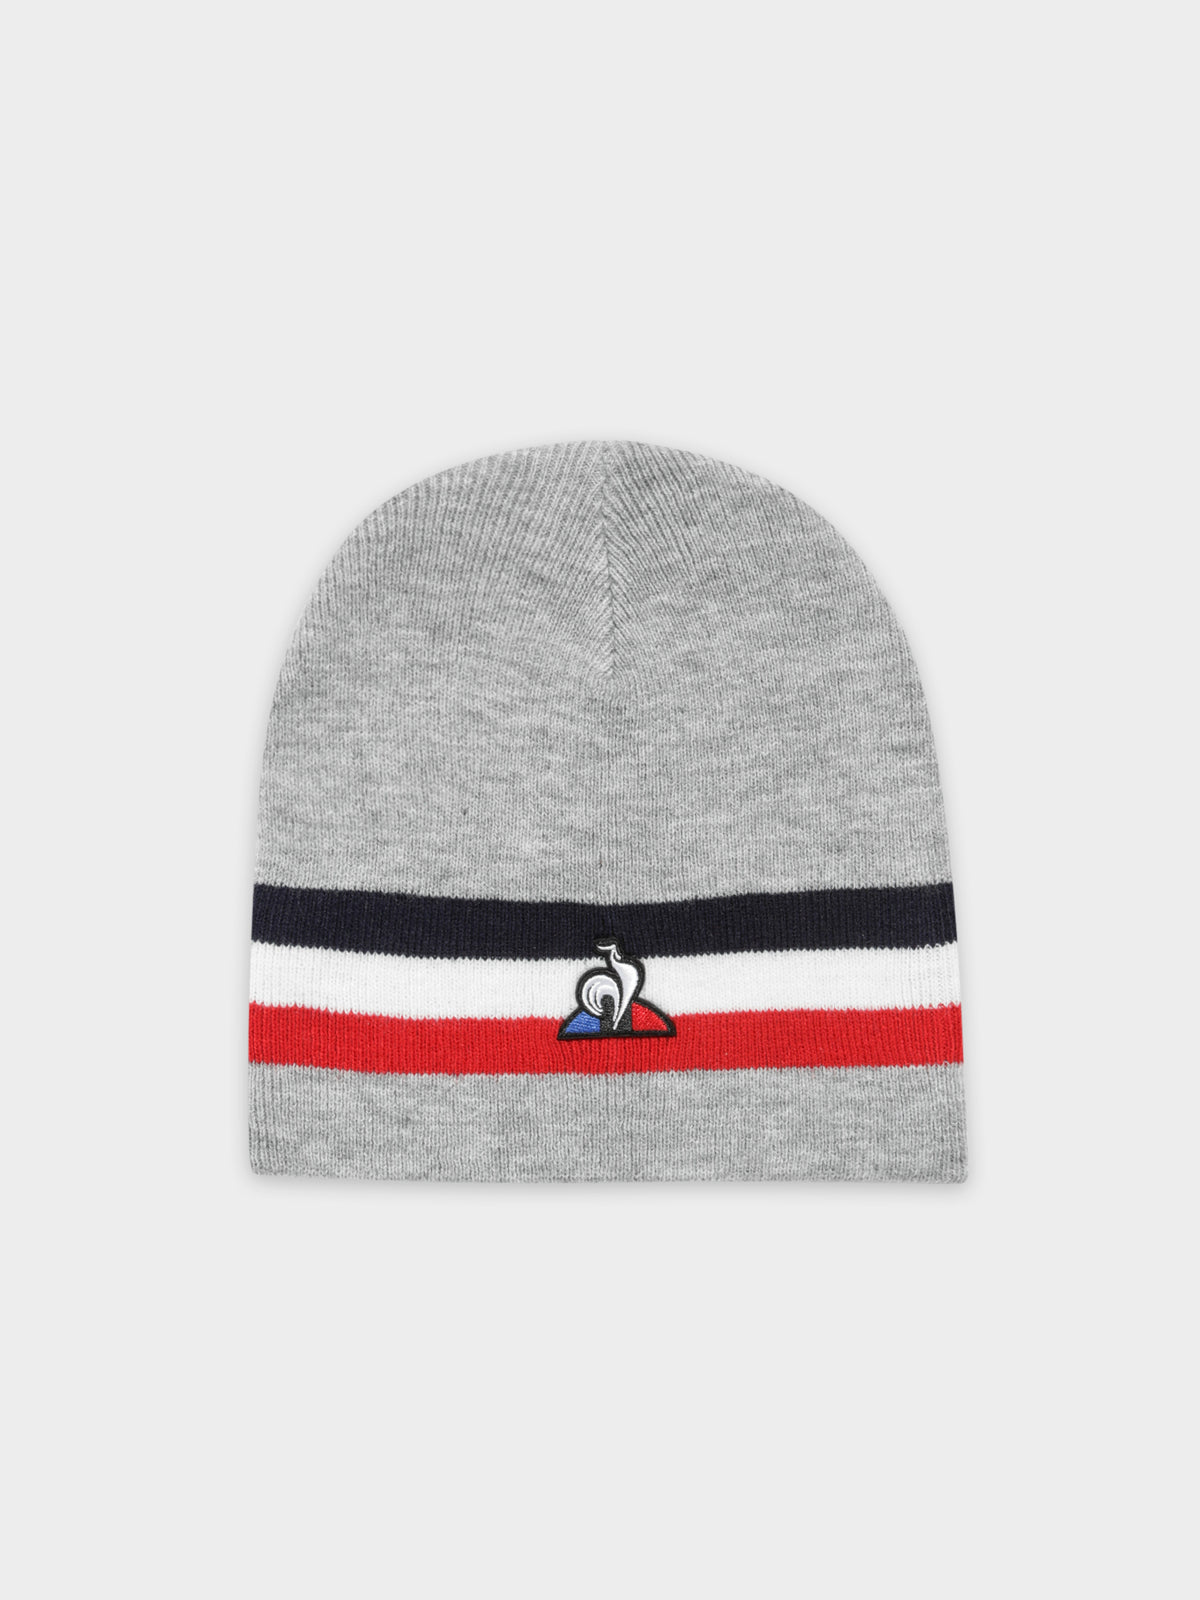 Tricolore Beanie in Grey Marle